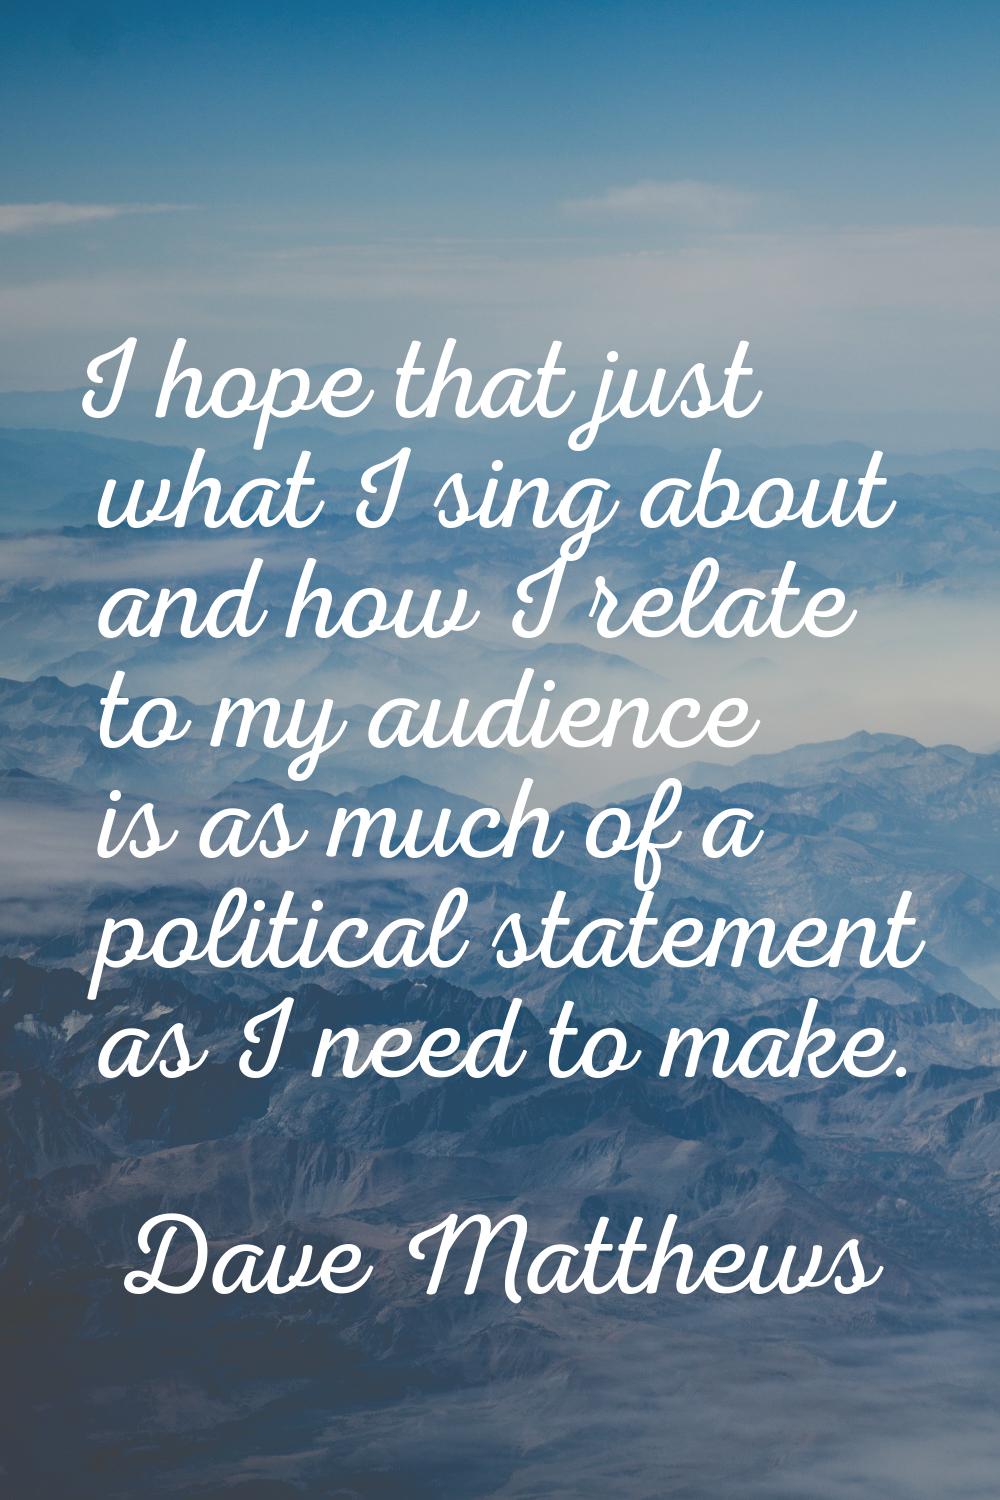 I hope that just what I sing about and how I relate to my audience is as much of a political statem